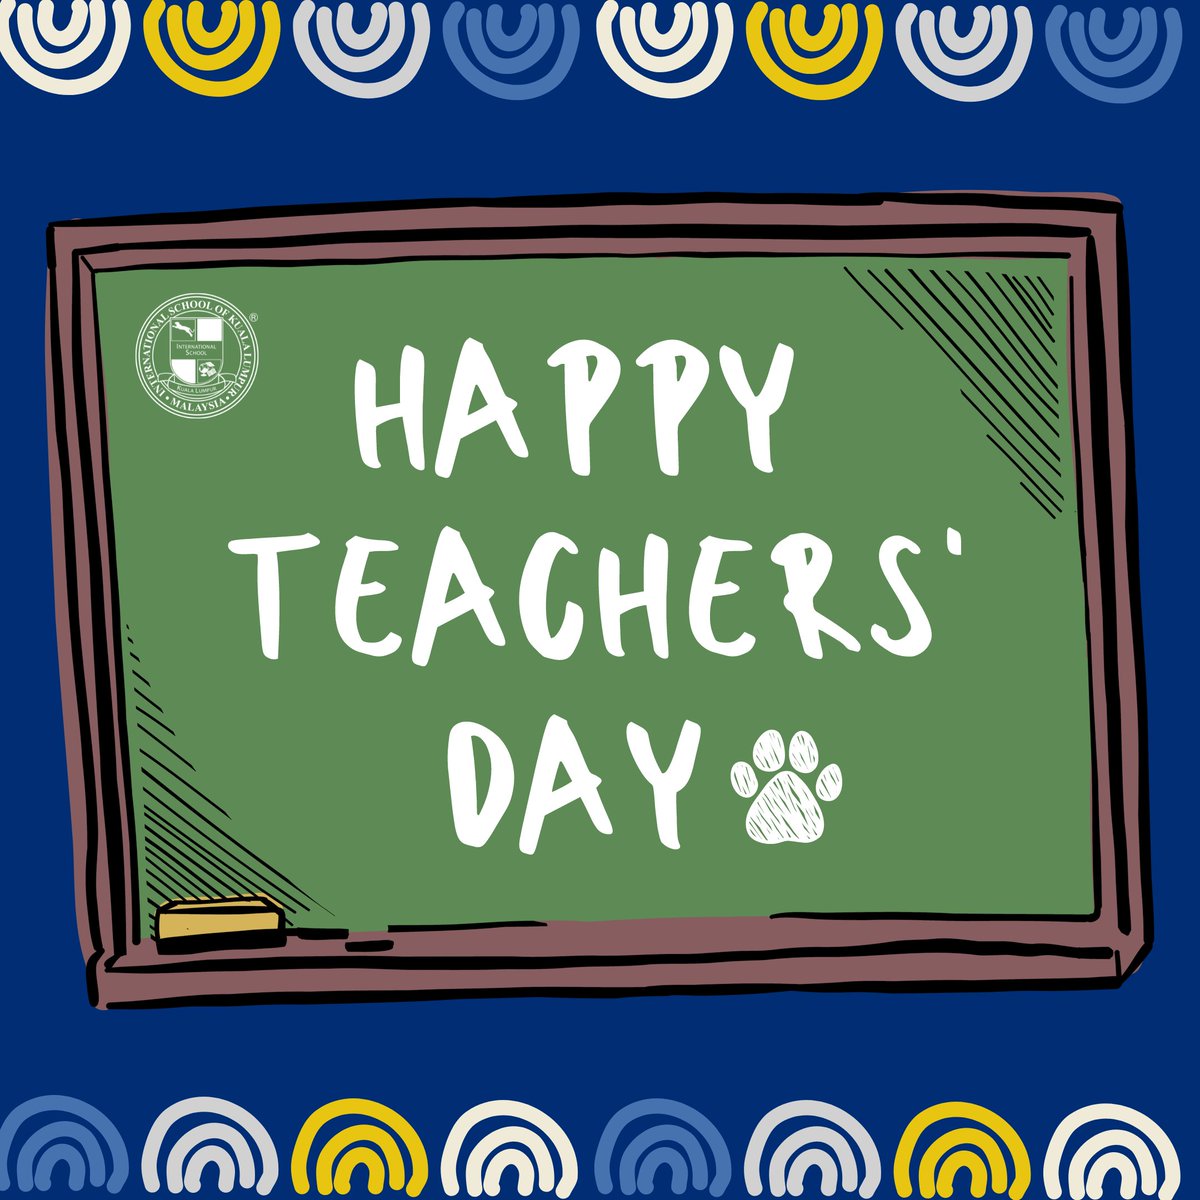 Cheers to our PAWEsome teachers who make every day a learning celebration! 🎉 Thank you for your tireless efforts and boundless creativity in making learning an exciting, enriching experience.  Happy Teacher's Day! #ISKL #ISKLproud